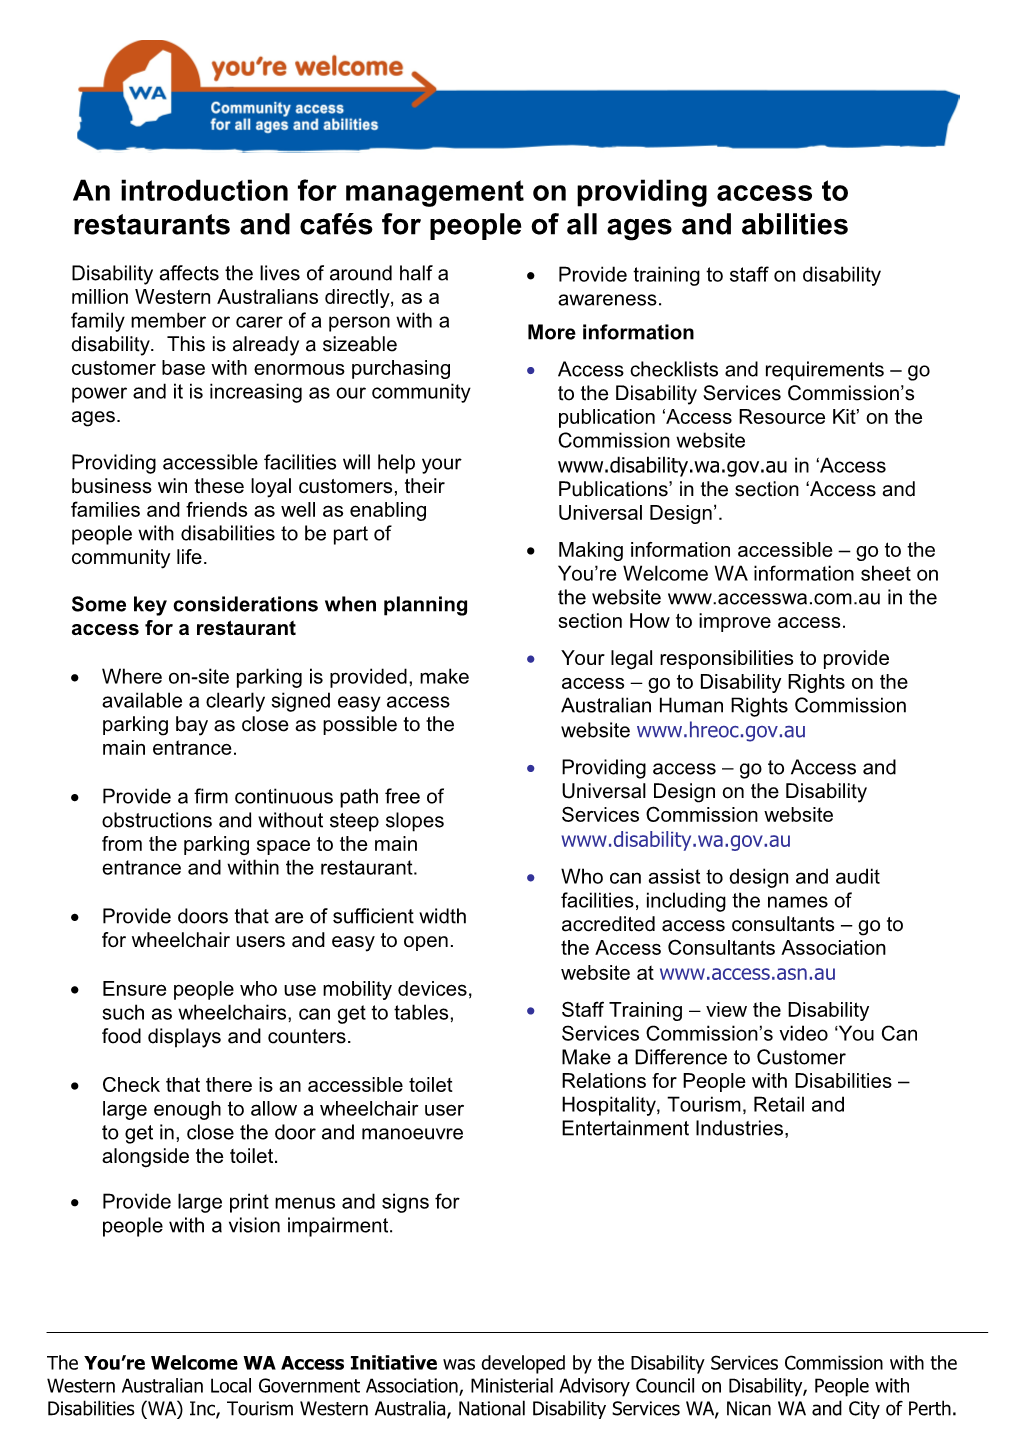 You're Welcome - Accessible Restaurants